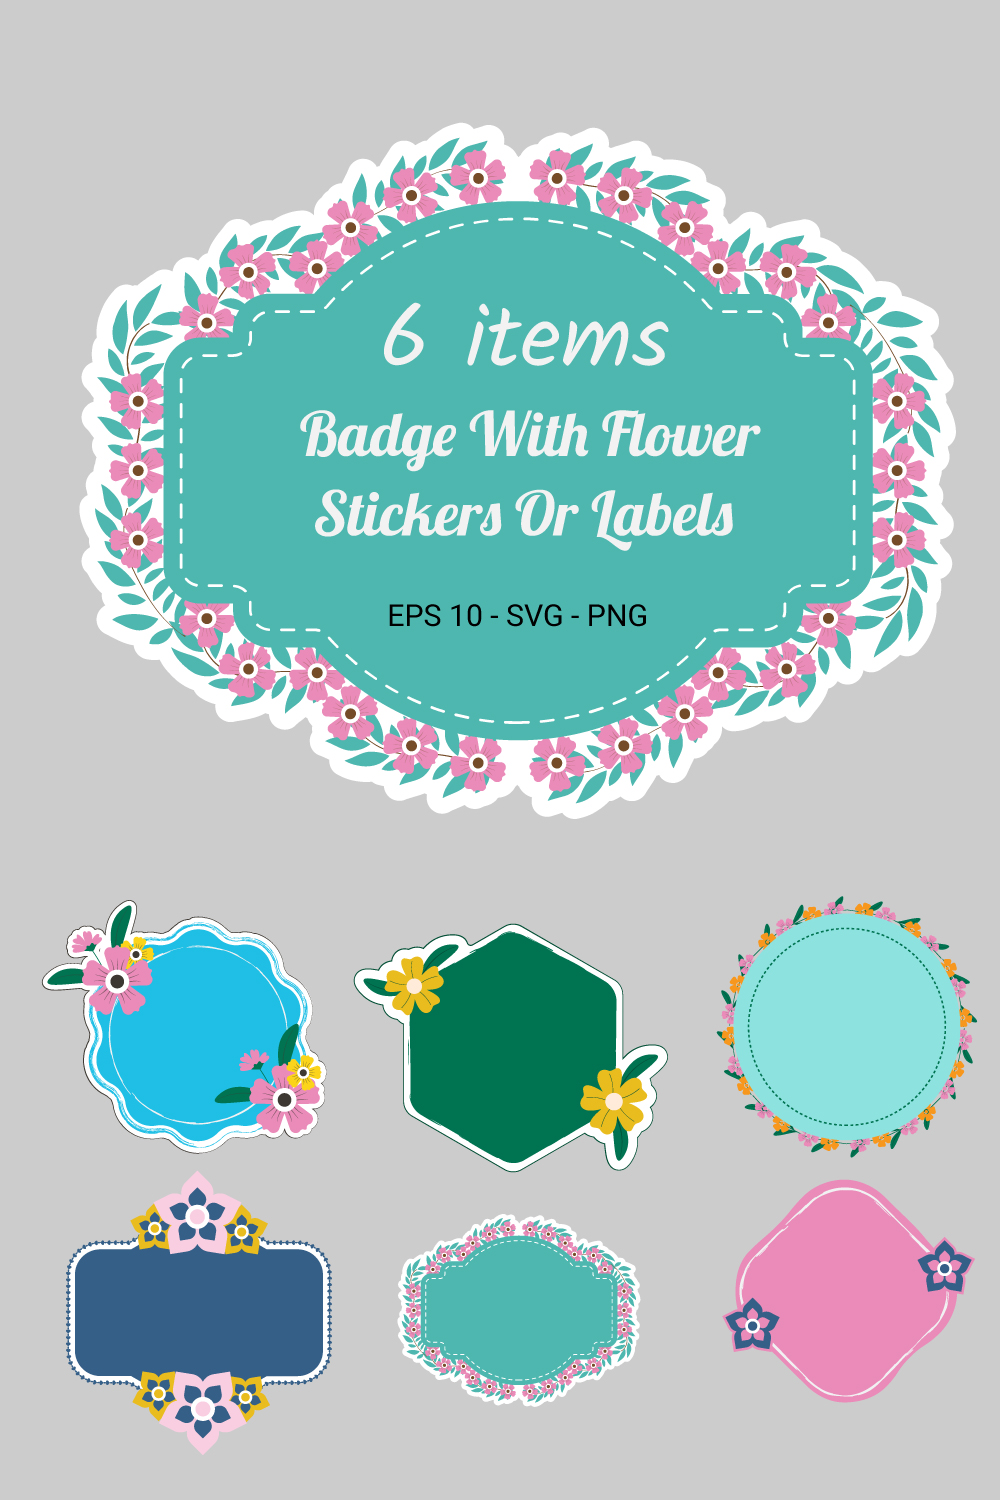 Badge with Flower Stickers or Labels Vectors pinterest image.